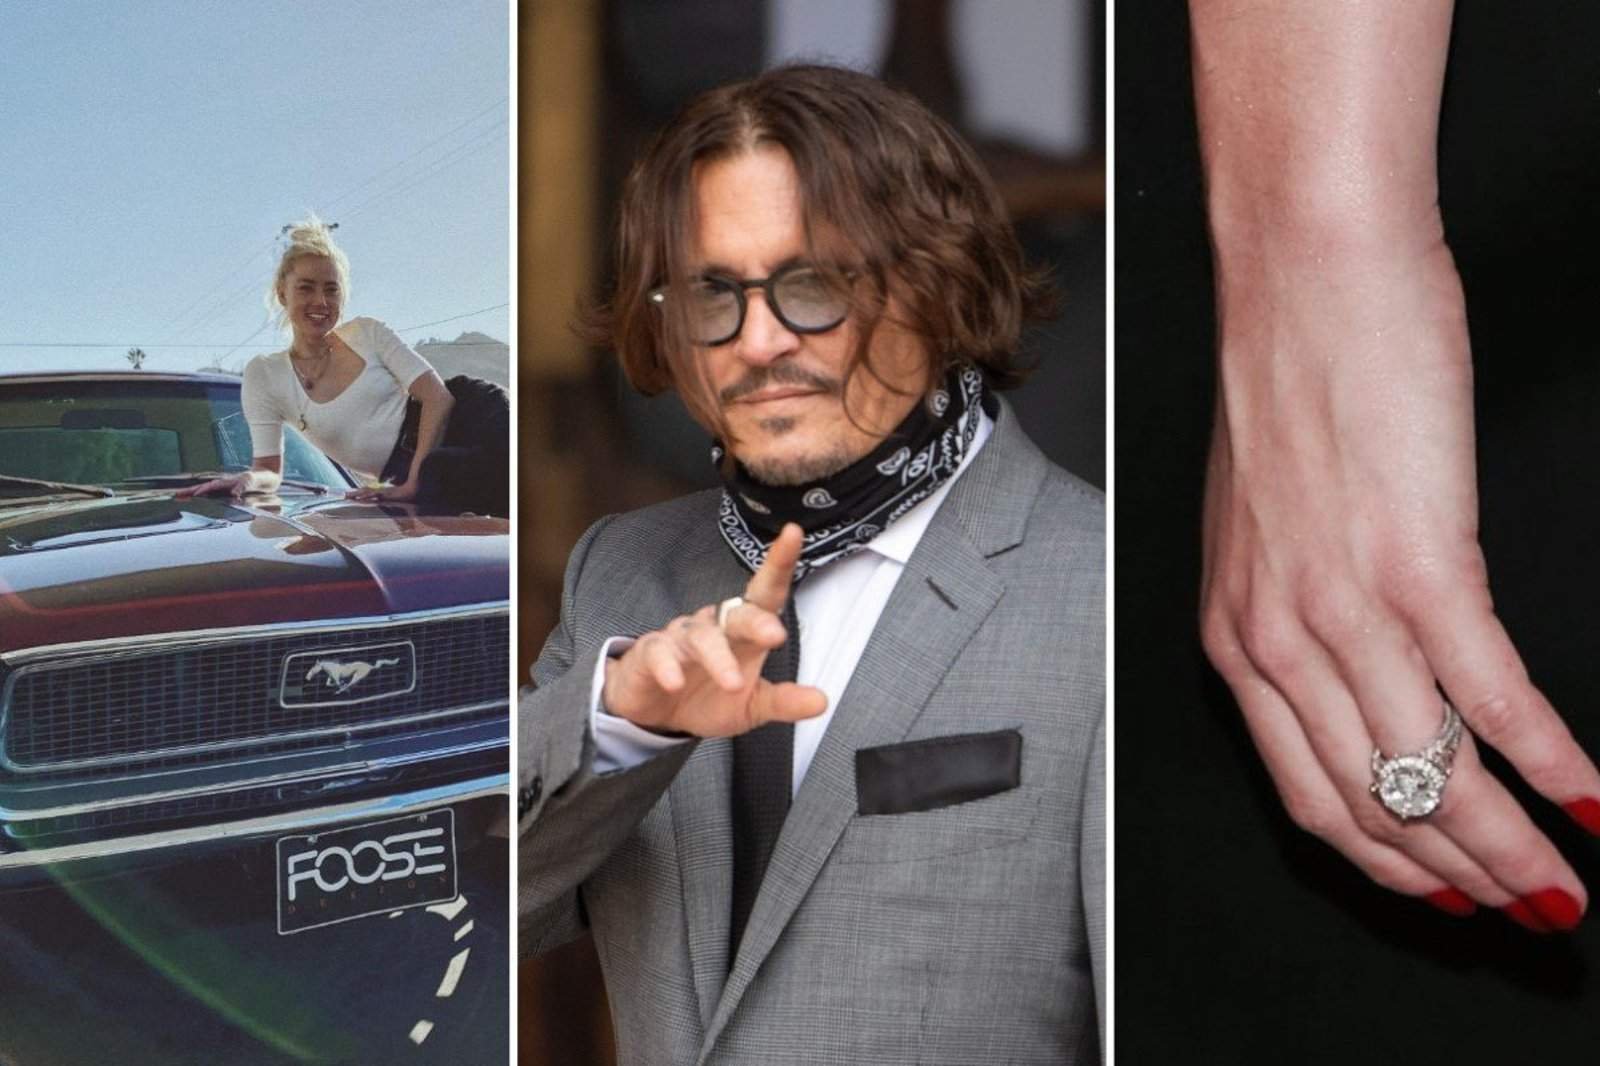 He even renamed his $33 million luxury yacht on her as a wedding gift – These are Johnny Depp’s most extravagant gifts for Amber Heard – From a rare $150,000 Ernst Hemingway book to a customised Ford Mustang, the superstar splurged on the love of this life.